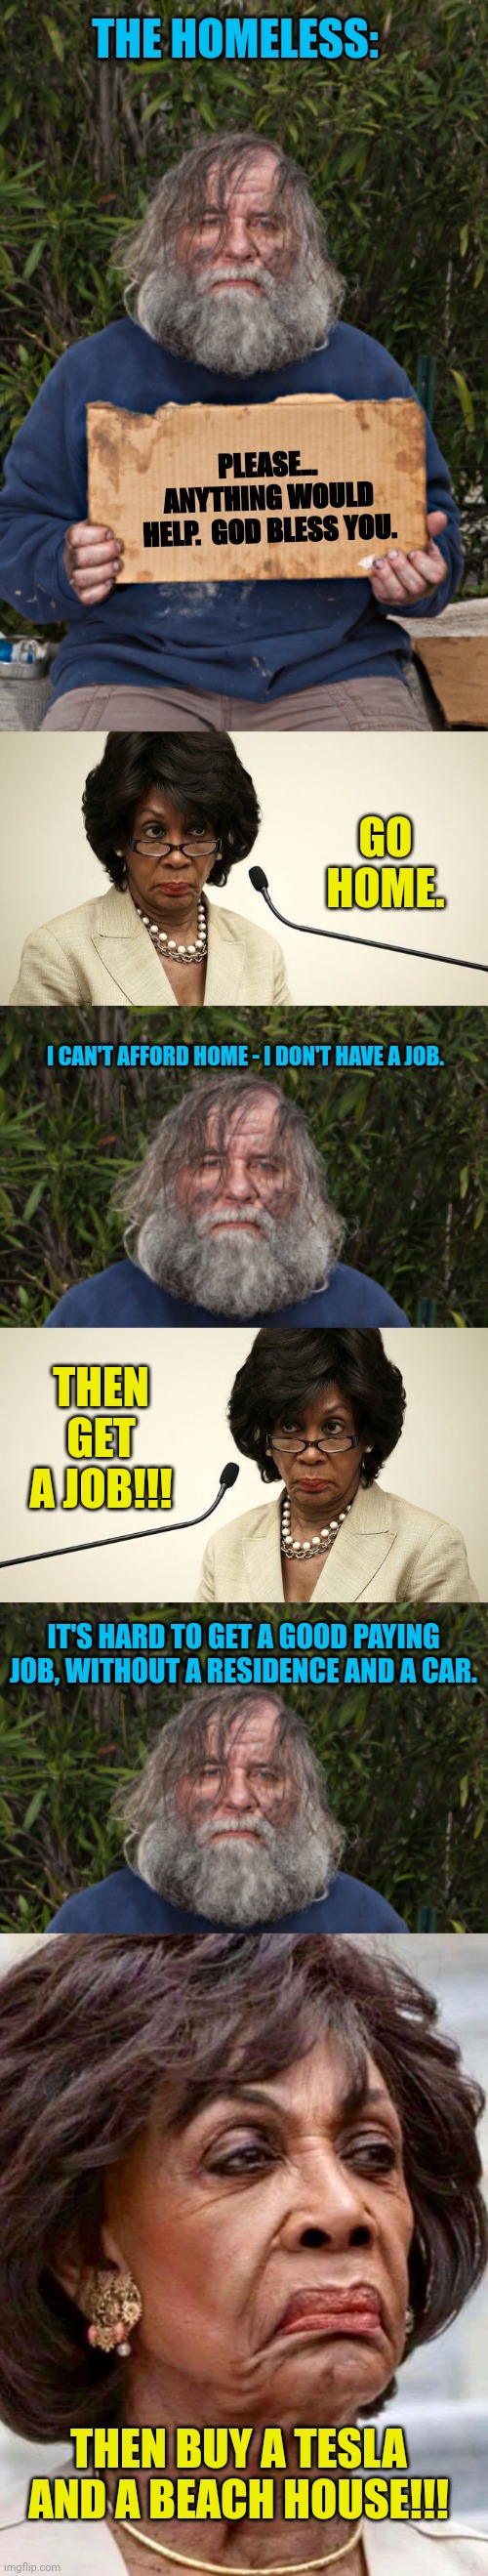 Democrats fixing homelessness... | THE HOMELESS:; PLEASE... ANYTHING WOULD HELP.  GOD BLESS YOU. GO HOME. I CAN'T AFFORD HOME - I DON'T HAVE A JOB. THEN GET A JOB!!! IT'S HARD TO GET A GOOD PAYING JOB, WITHOUT A RESIDENCE AND A CAR. THEN BUY A TESLA AND A BEACH HOUSE!!! | image tagged in blak homeless sign,maxine waters crazy,maxine waters | made w/ Imgflip meme maker